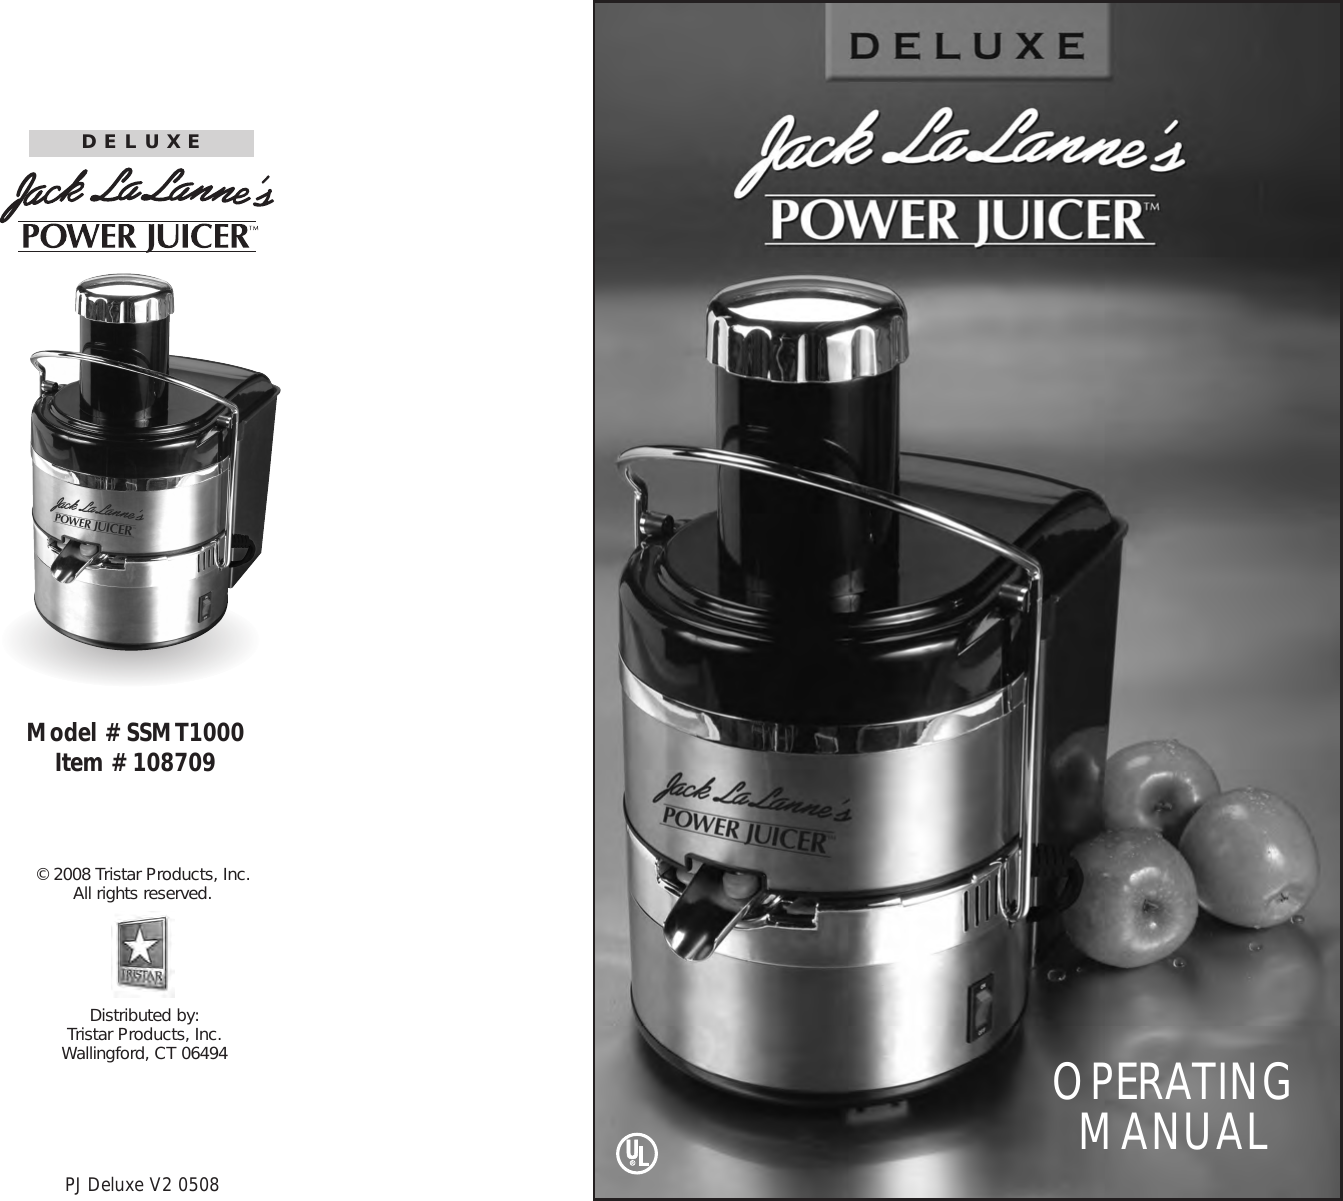 Jack Lalannes Power Juicer Deluxe Owners Manual PJ Instr. (PS)